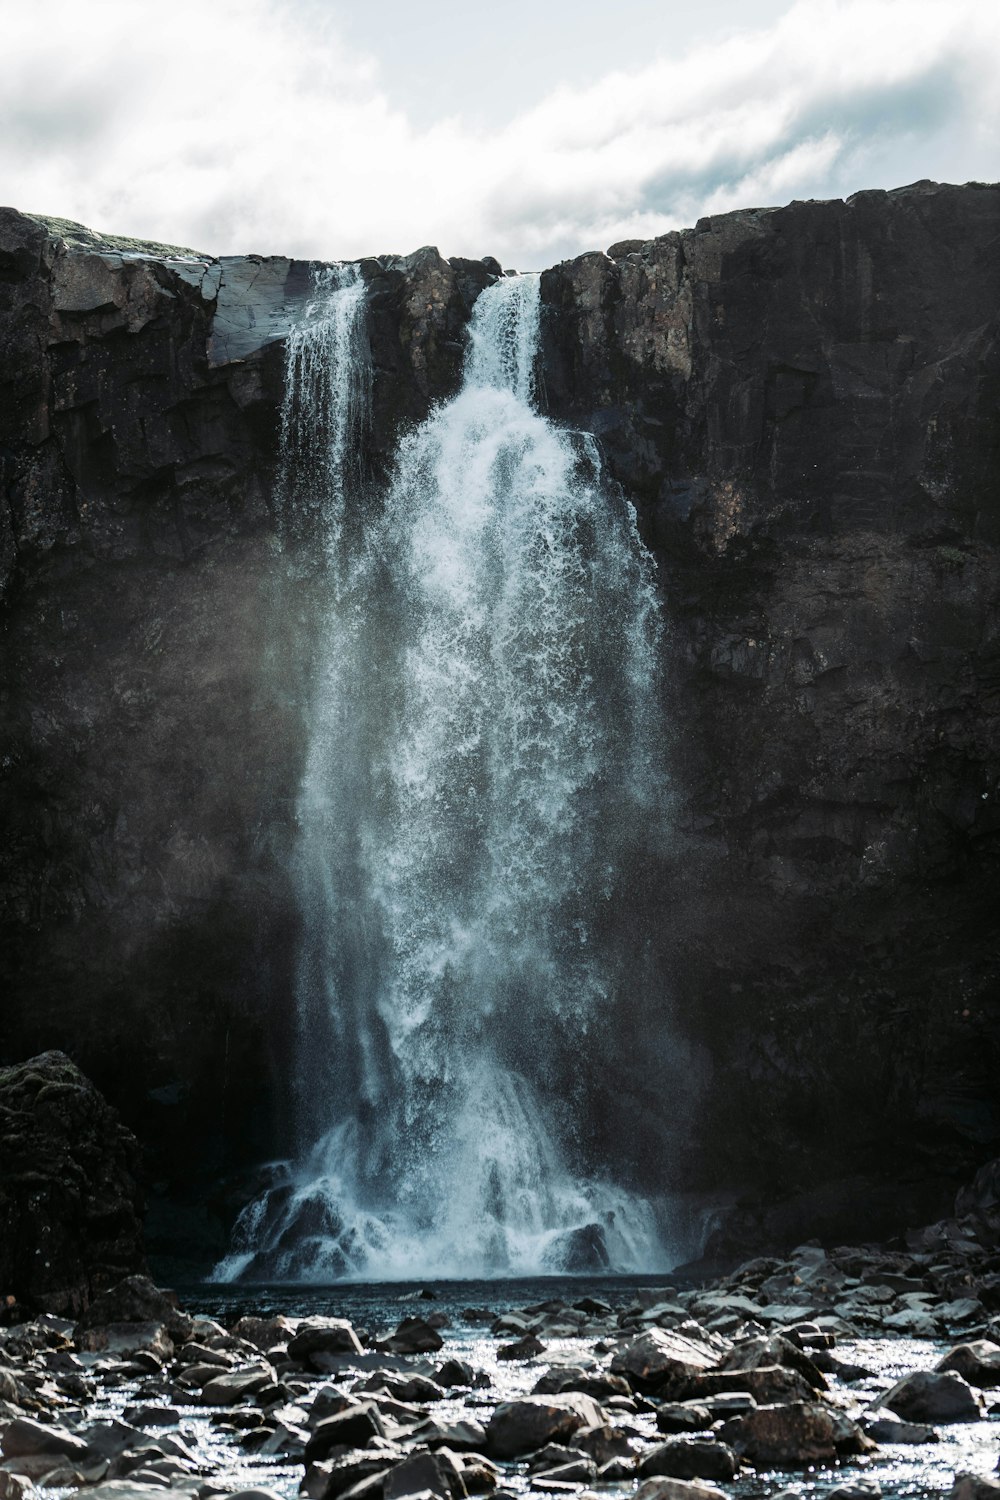 waterfalls under white and gray sky during daytime